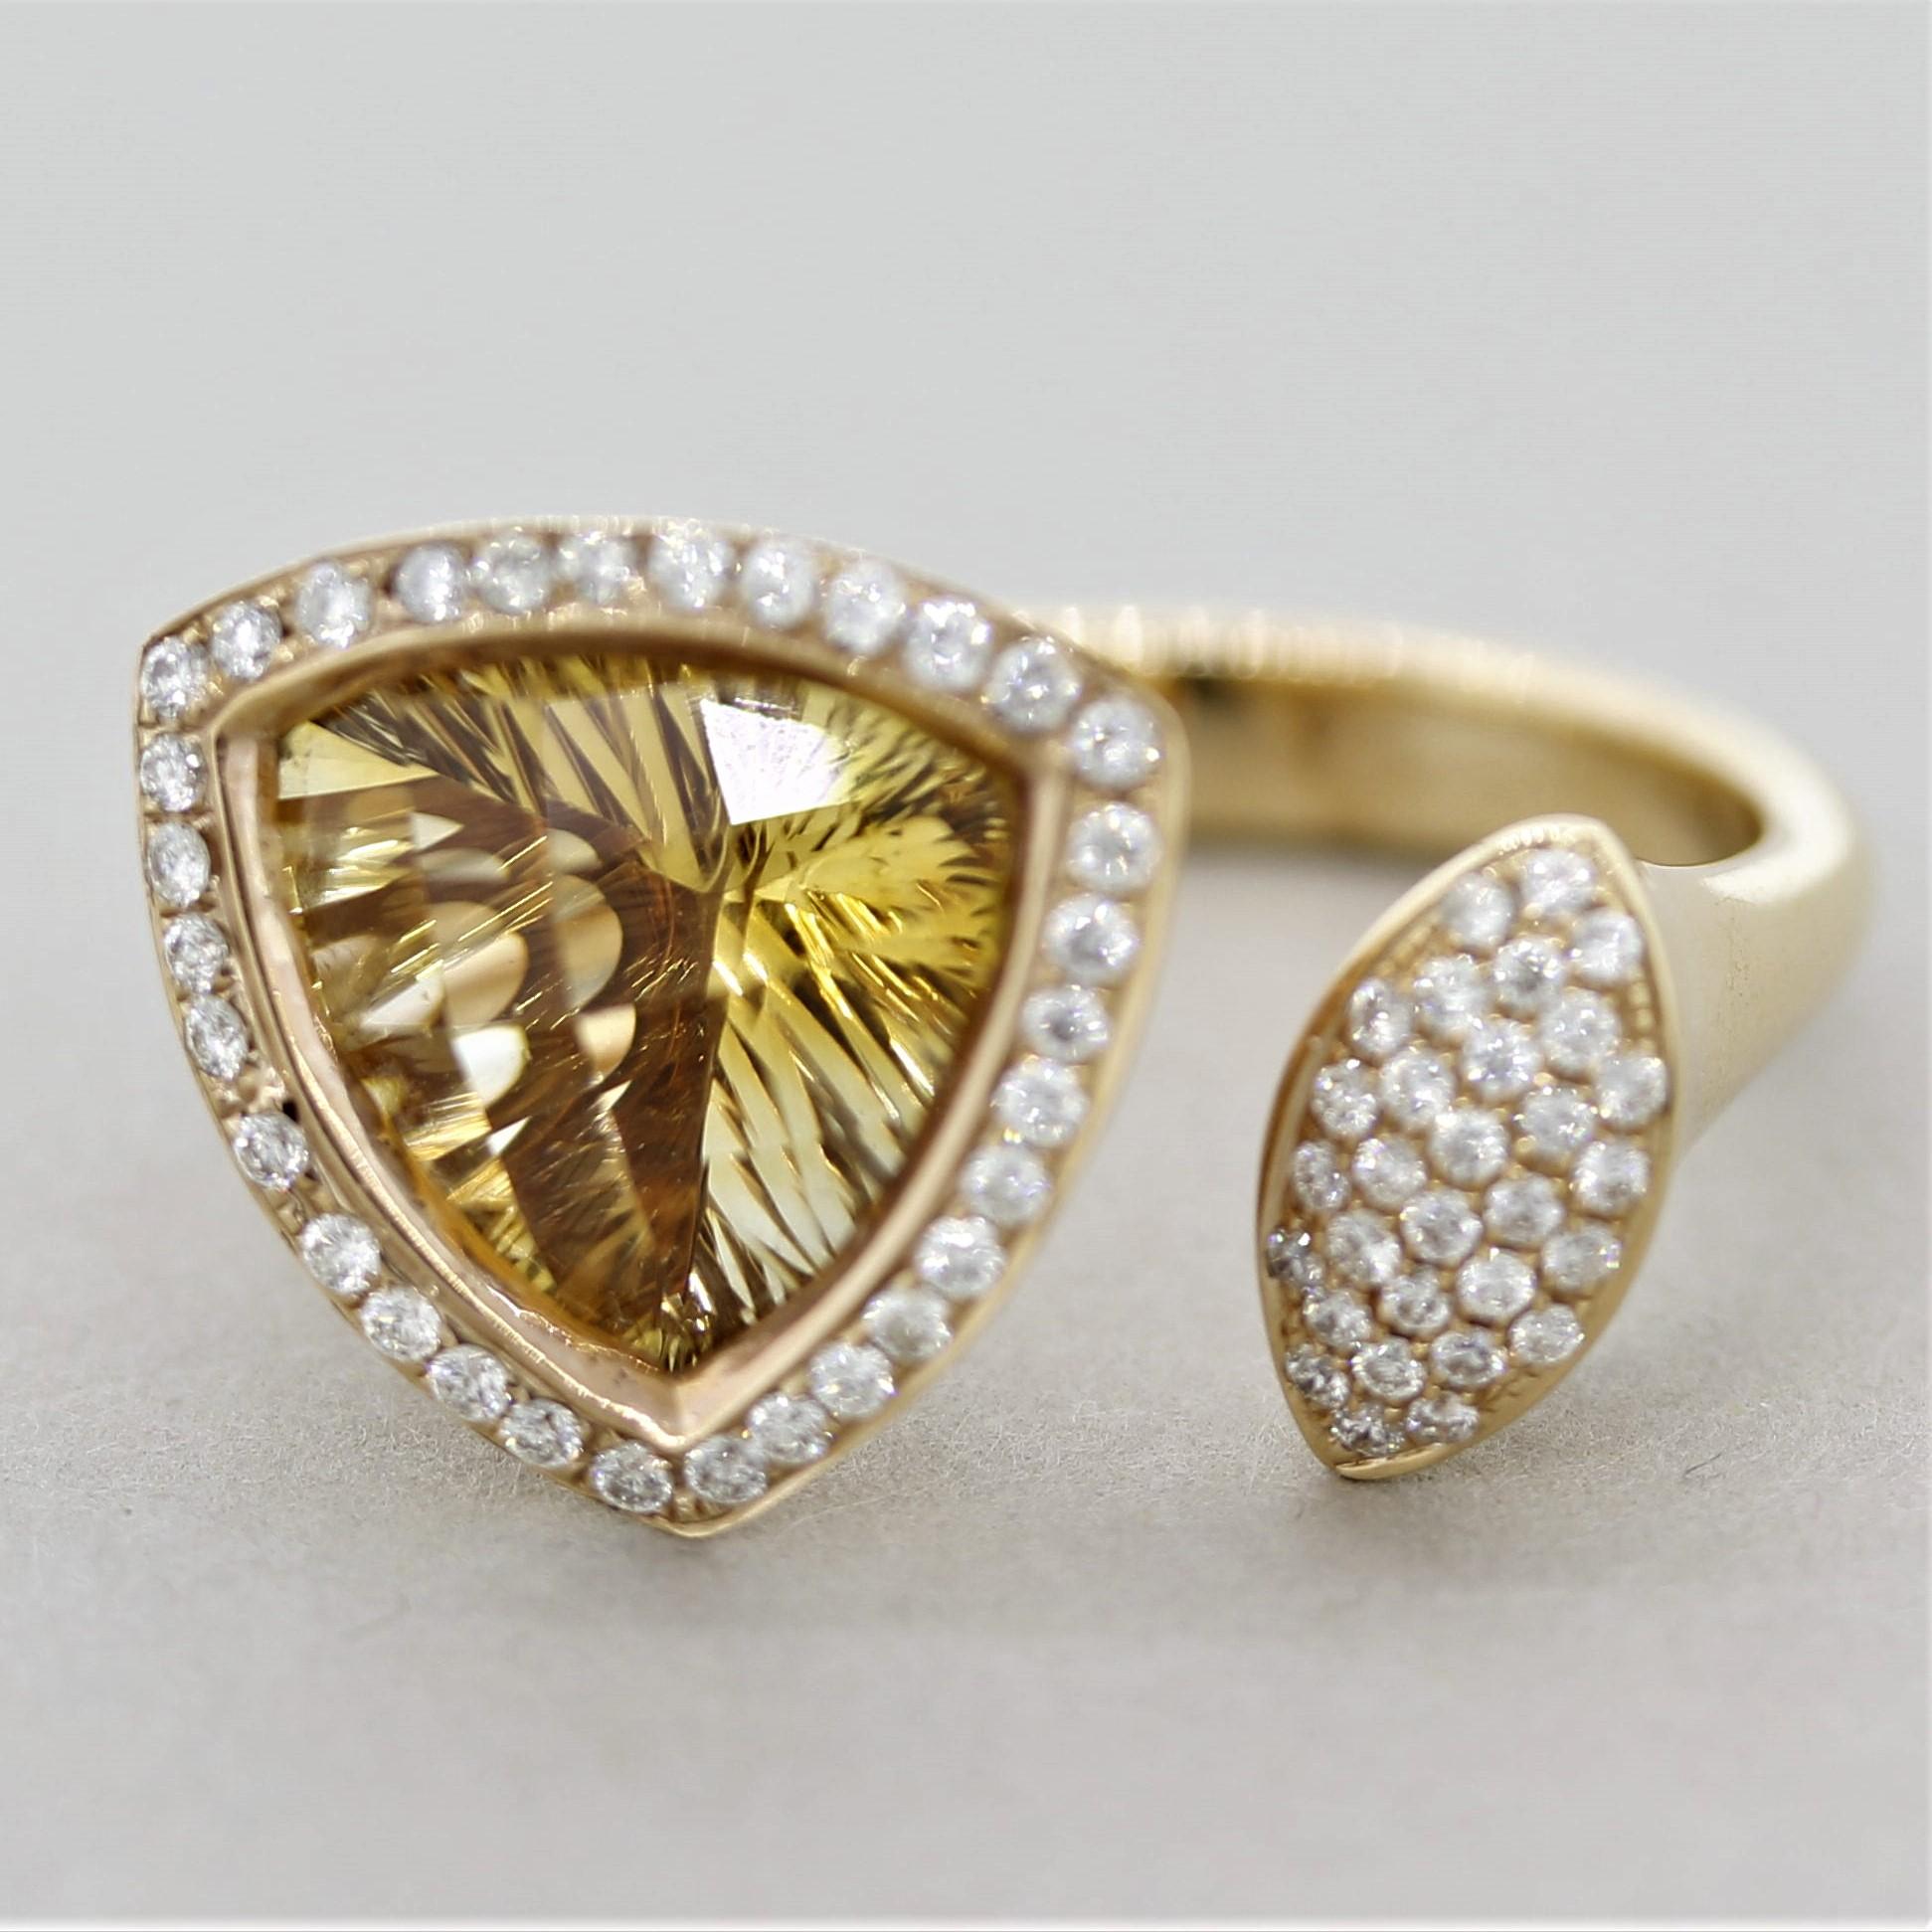 A unique design, this ring features a 3.86 carat trillion-shaped citrine with a stylish fantasy-cut.  Simply put, a fantasy cut is a unique cutting style that puts shape and angled facets on the stone allowing the light to refract in a different